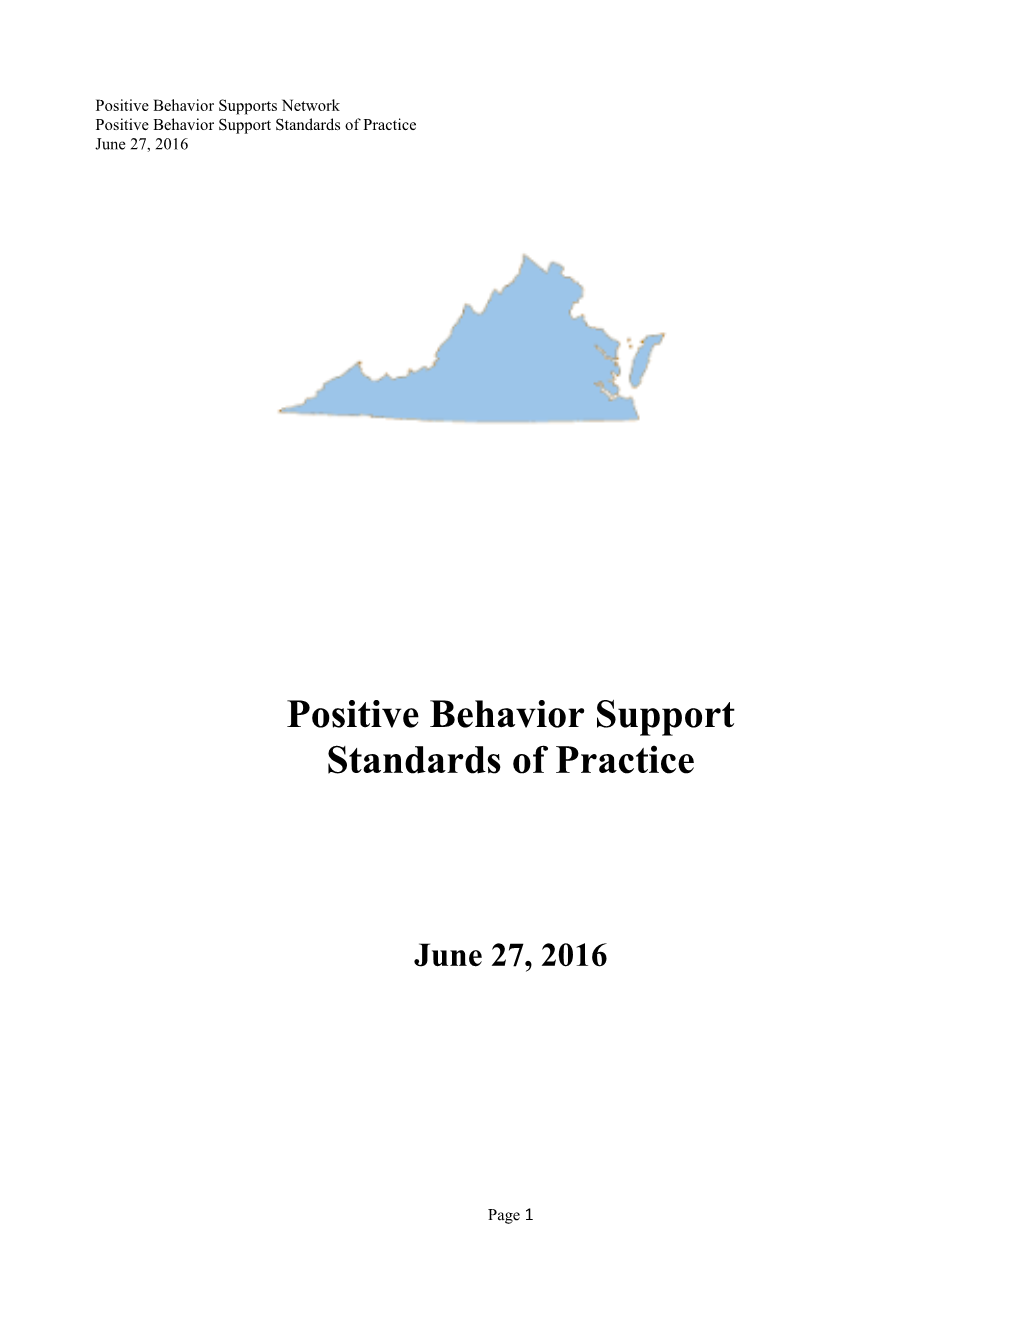 Pbs Standards of Practic: Individual Level